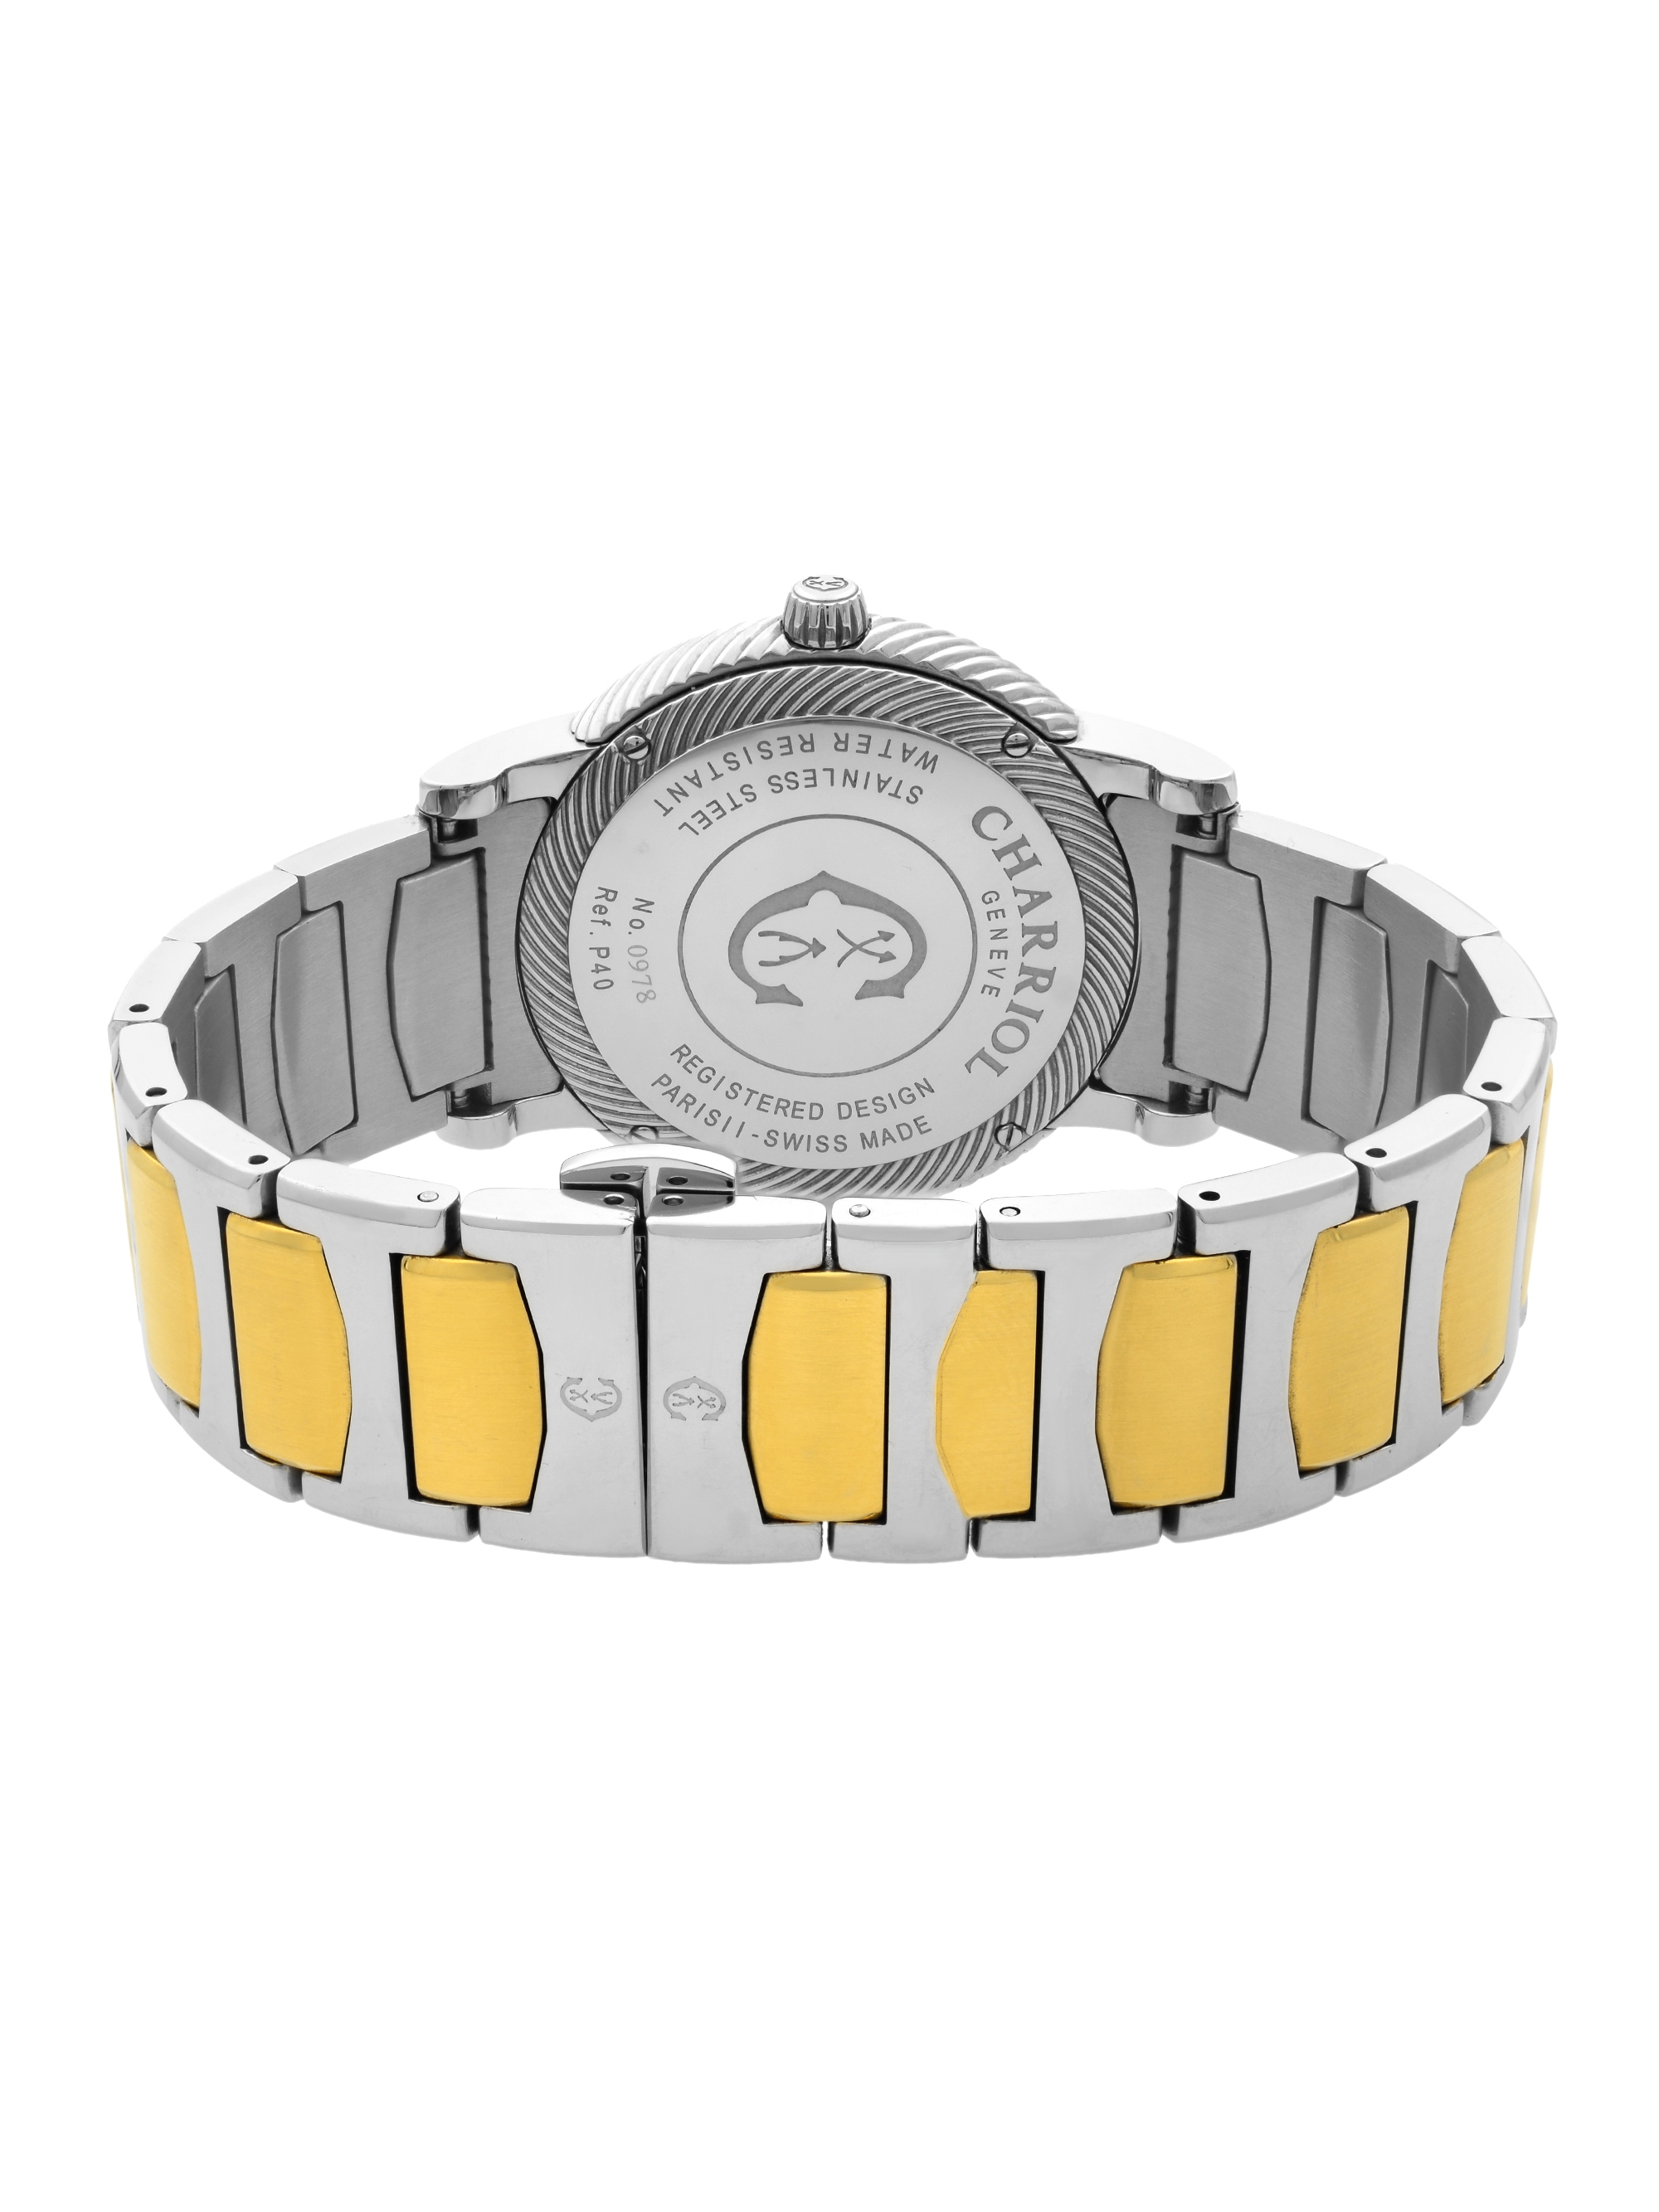 Charriol Parisii Two Tone Steel Silver Dial Quartz Unisex Watch P40SY2.931.001 Pre-Owned - image 5 of 6